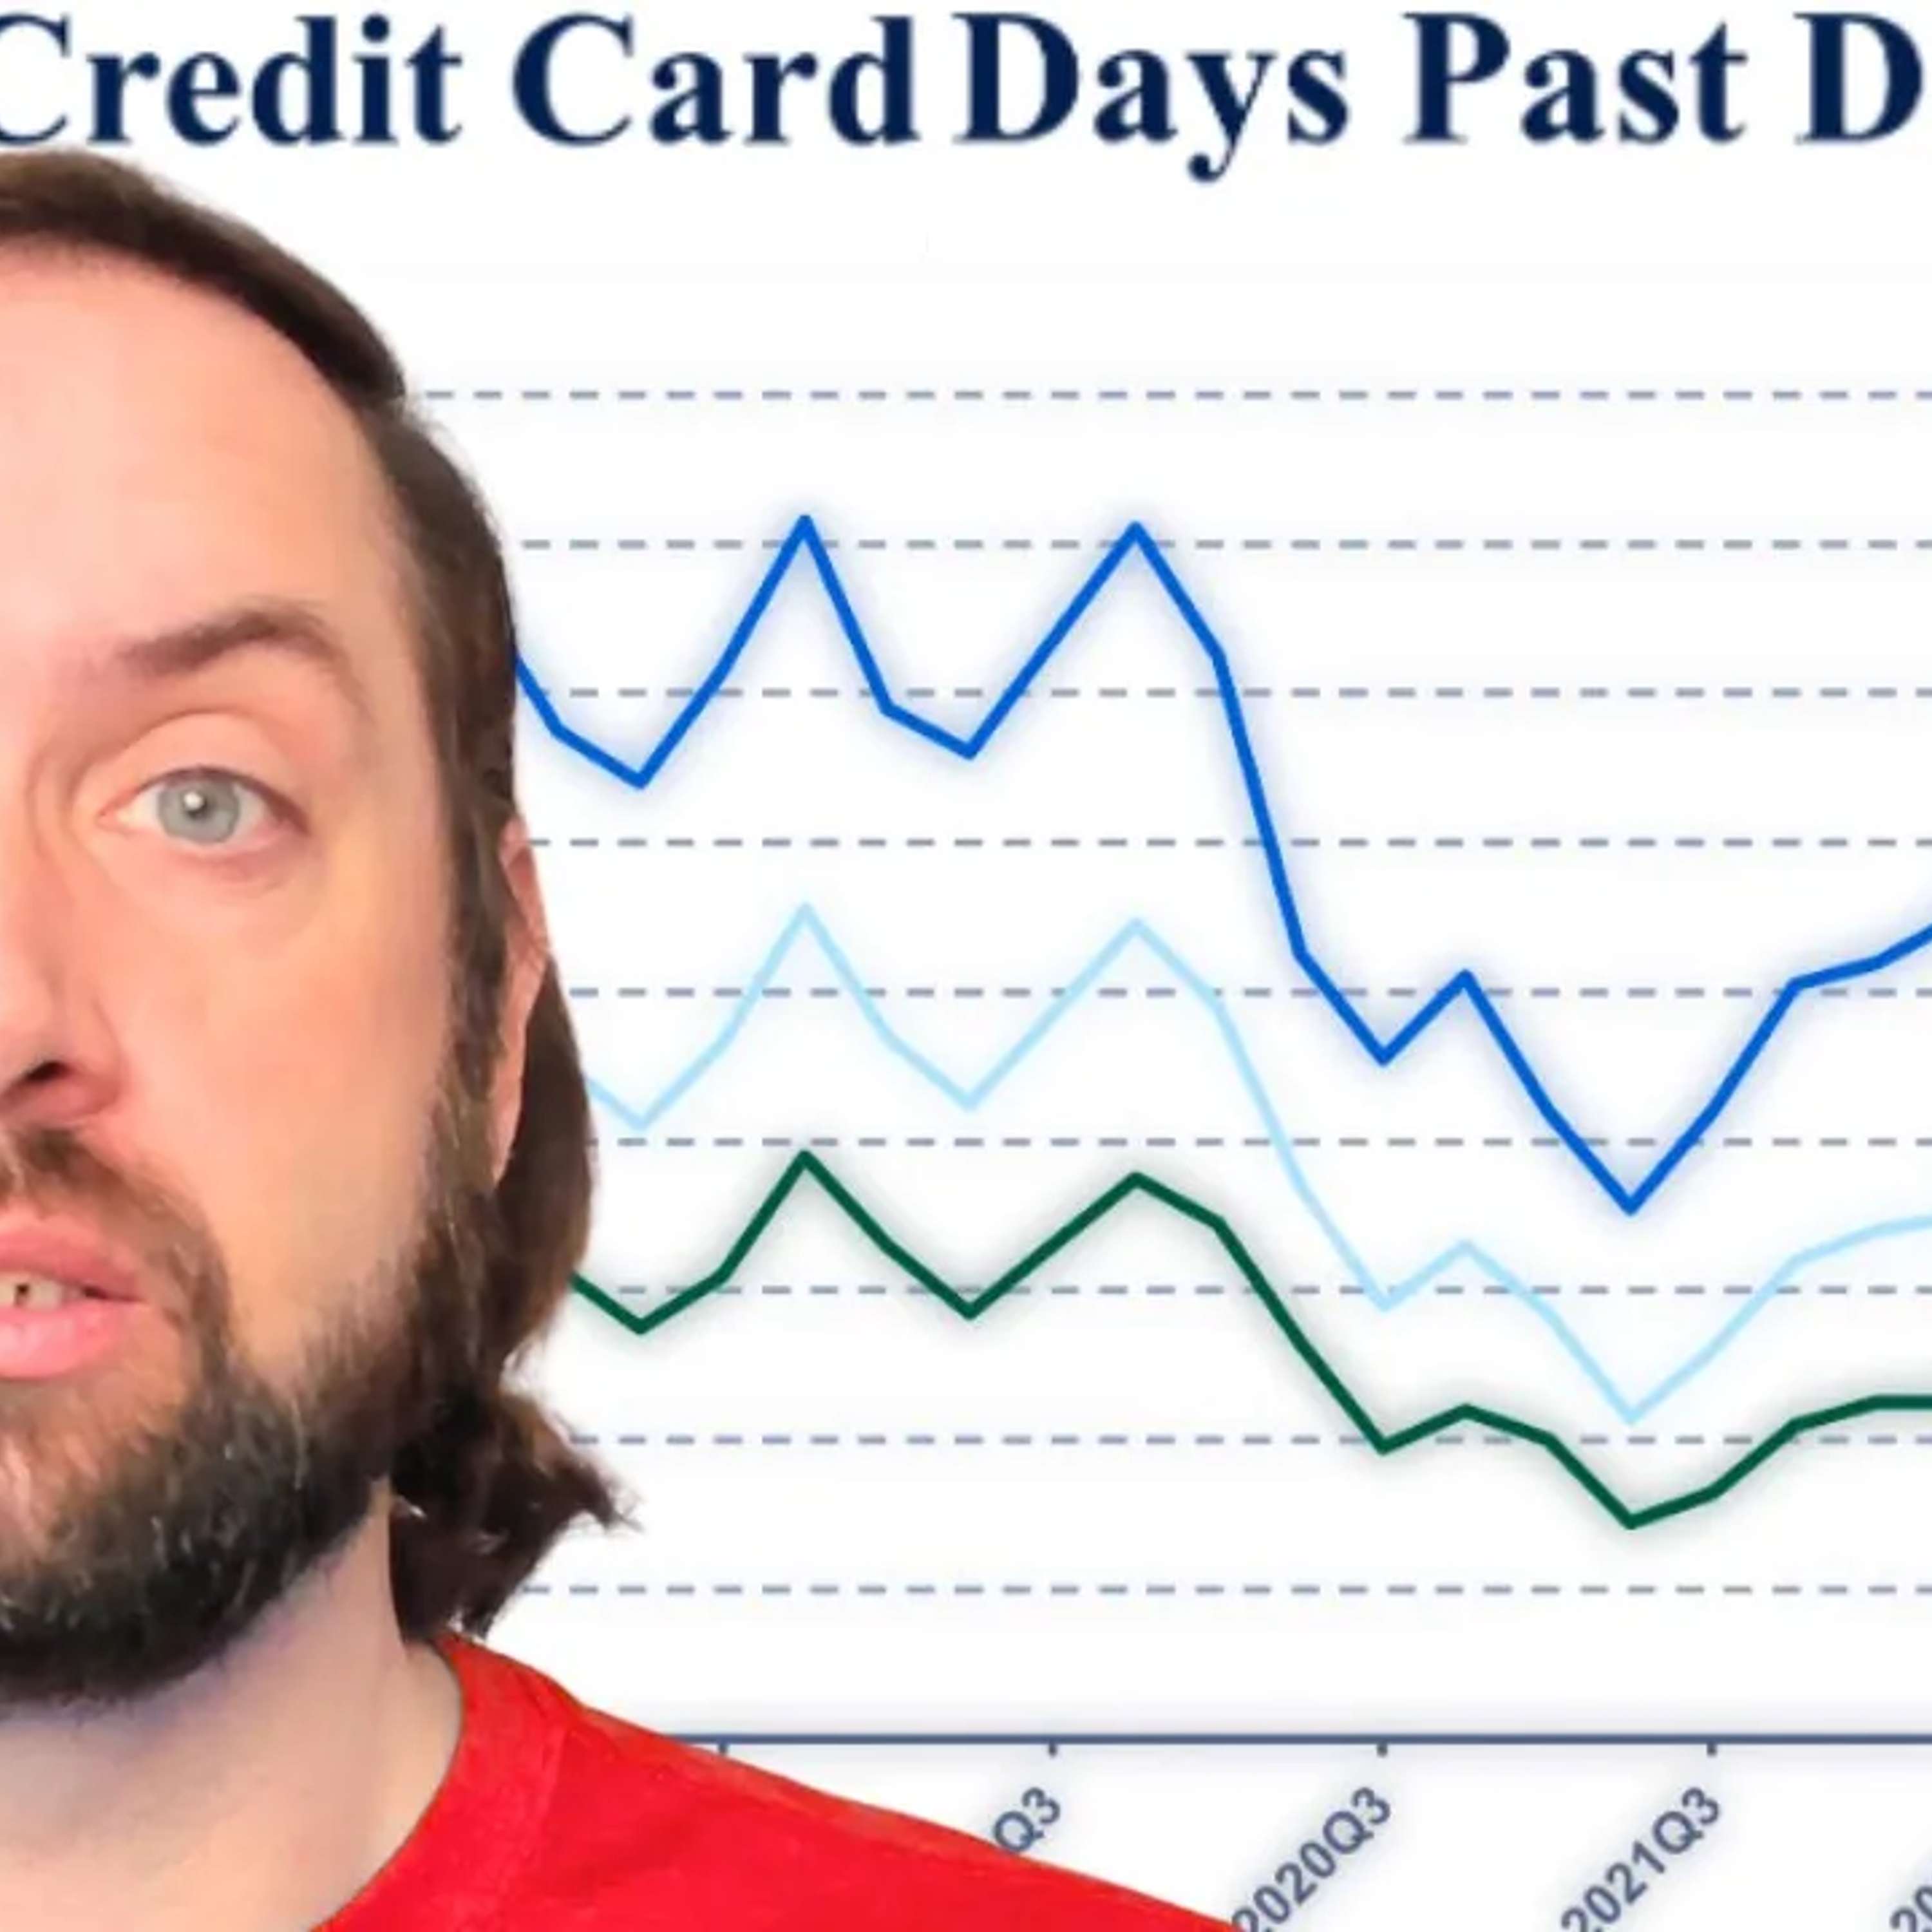 Fed Reports "People Now Unable to Pay Off Credit Card Debt"